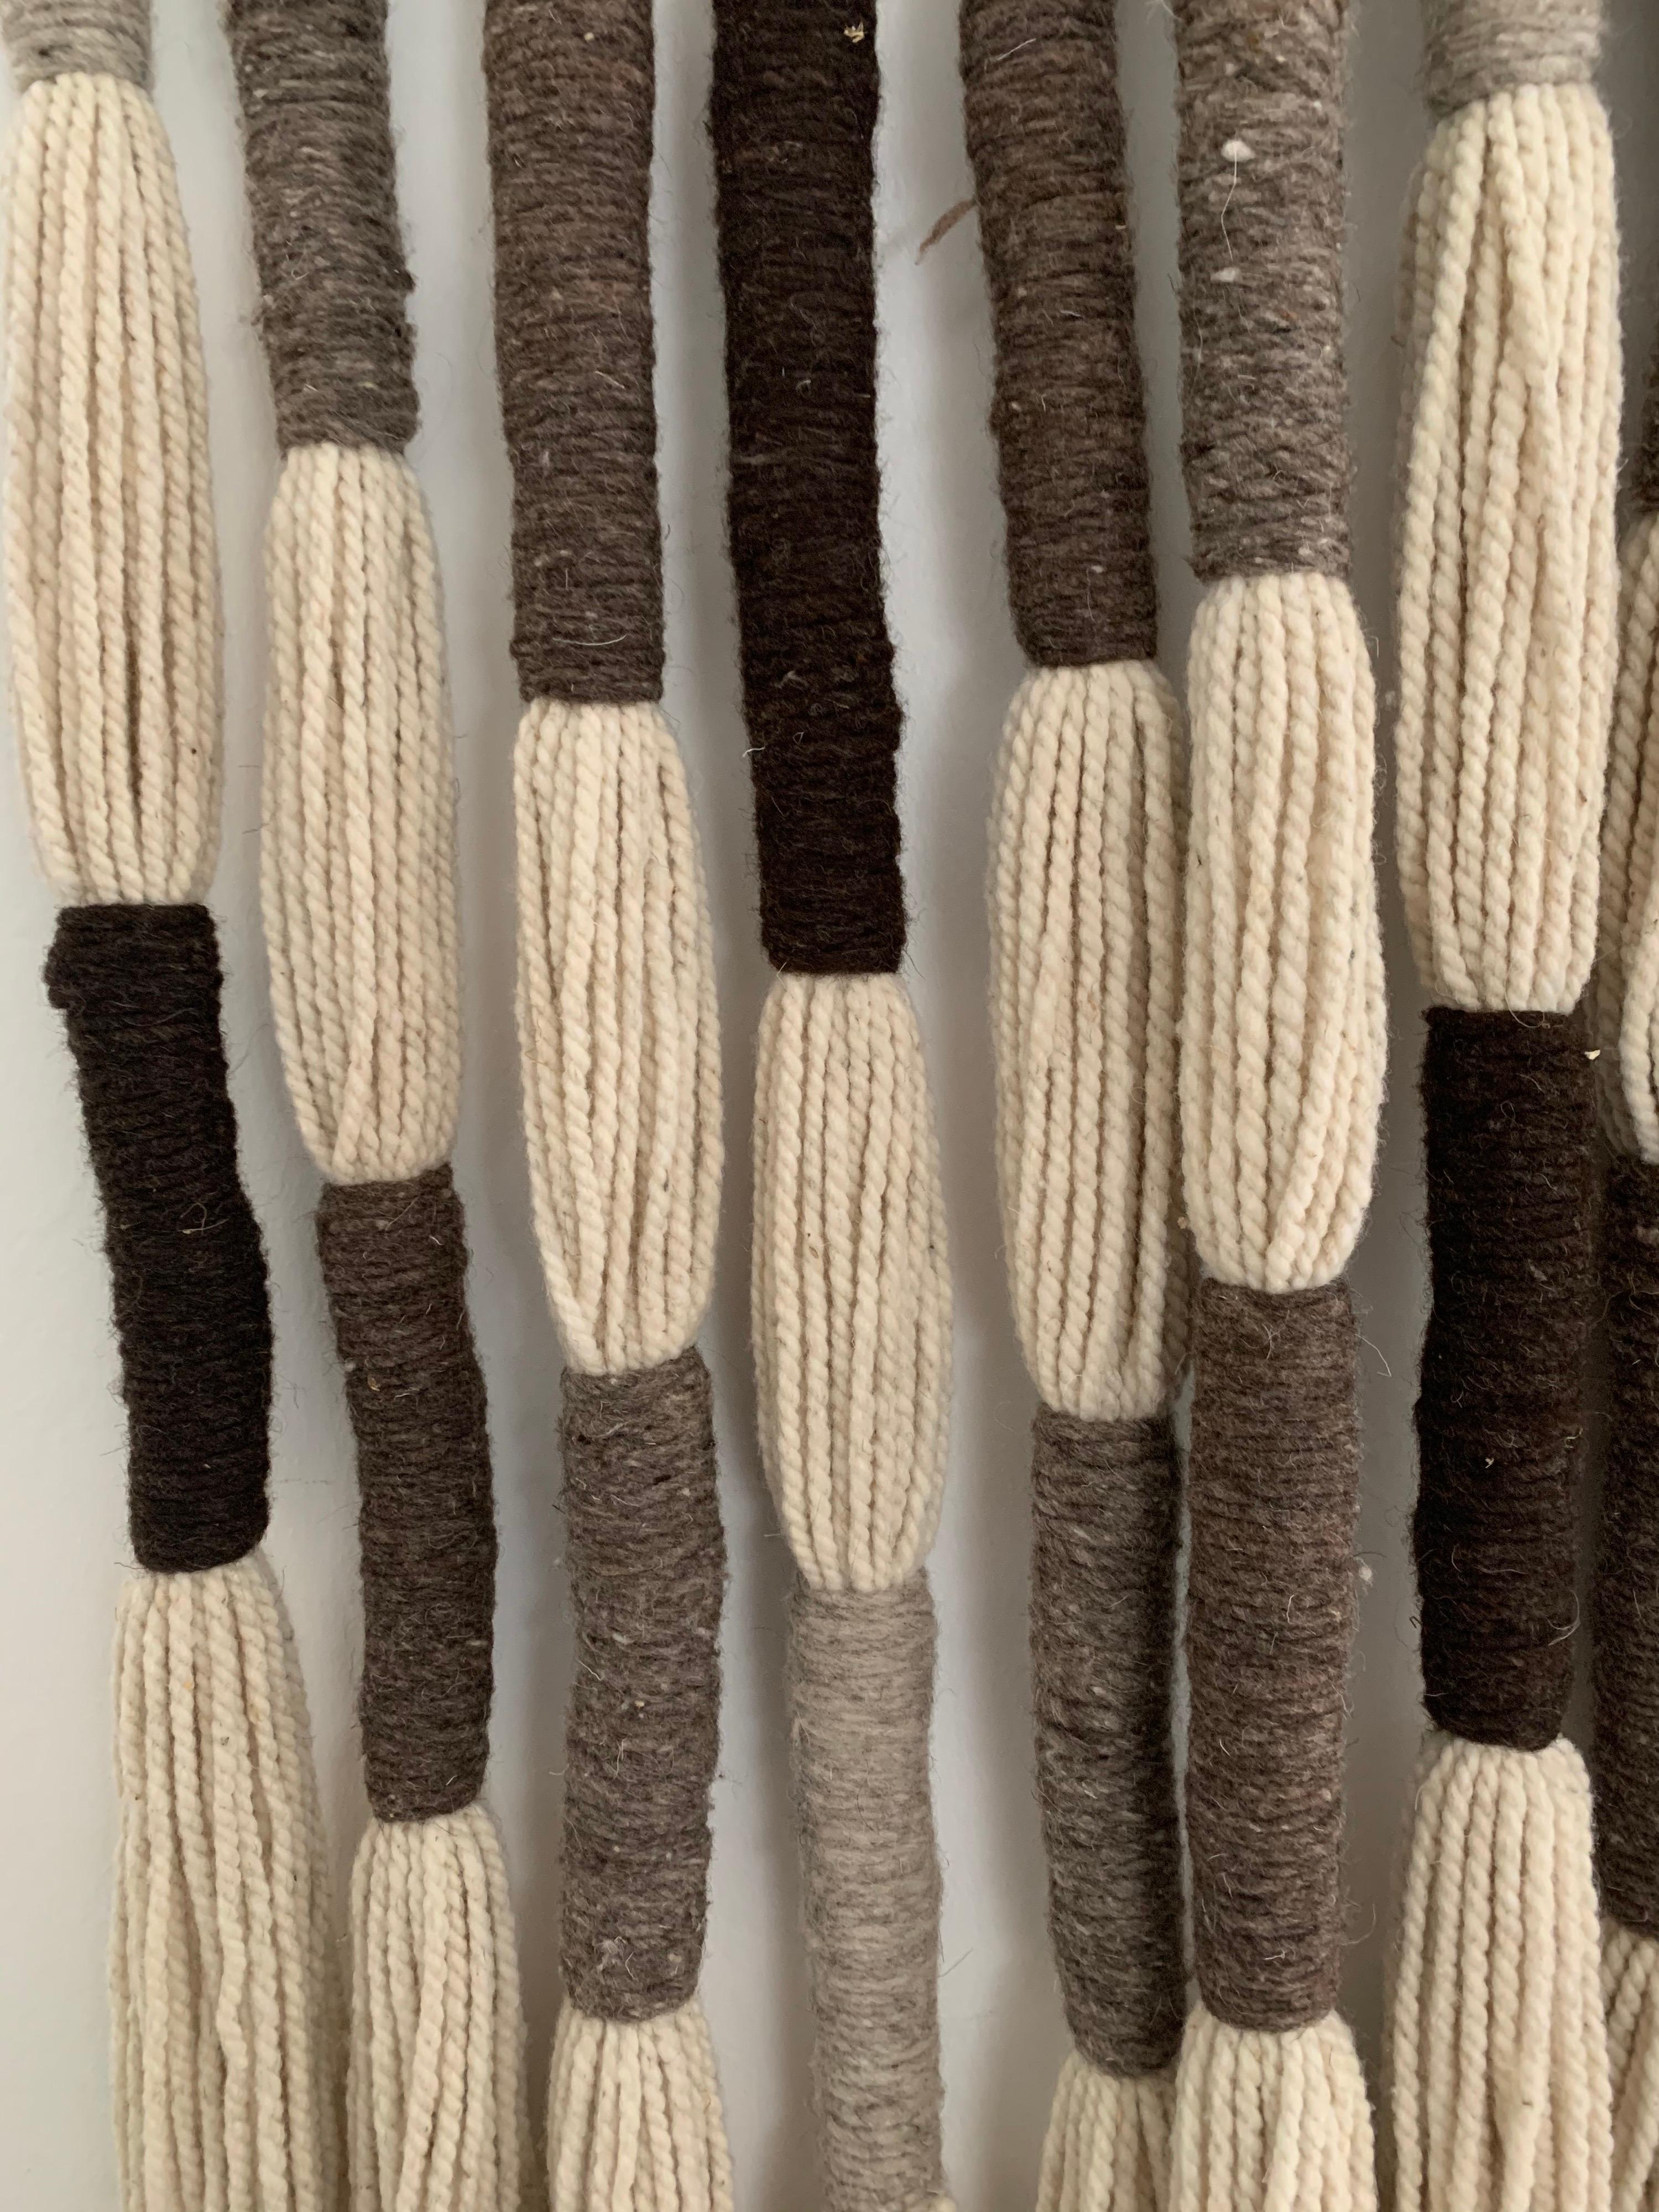 Reminiscent of Jane Knight's wall art in the 1960s, this is made from 100% natural died wools. This oversized wall hanging with earth tones (browns, greys and beige) is all hand made in a Mexican artist colony. The scale and ease of hanging is